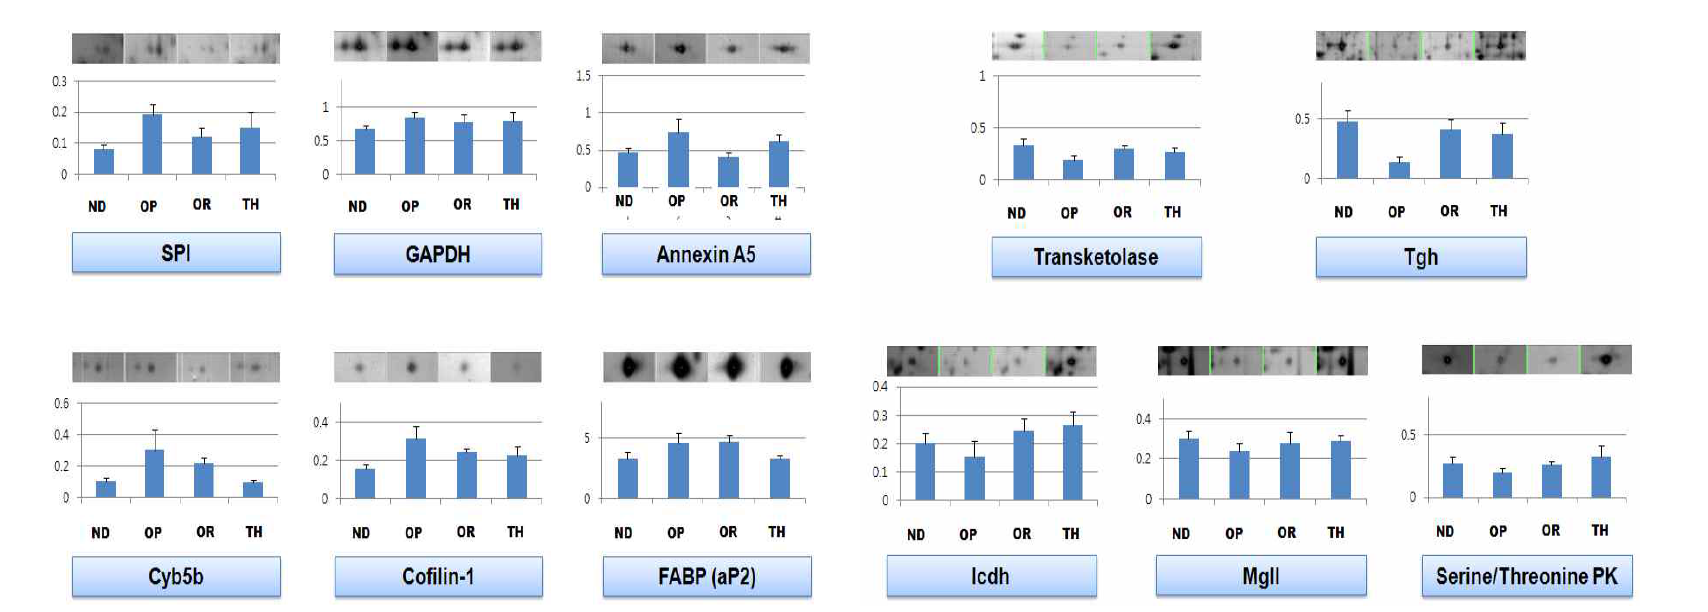 Comparison of expression patterns of obesity-related proteins between OP and ND/OR/OP/TH time.